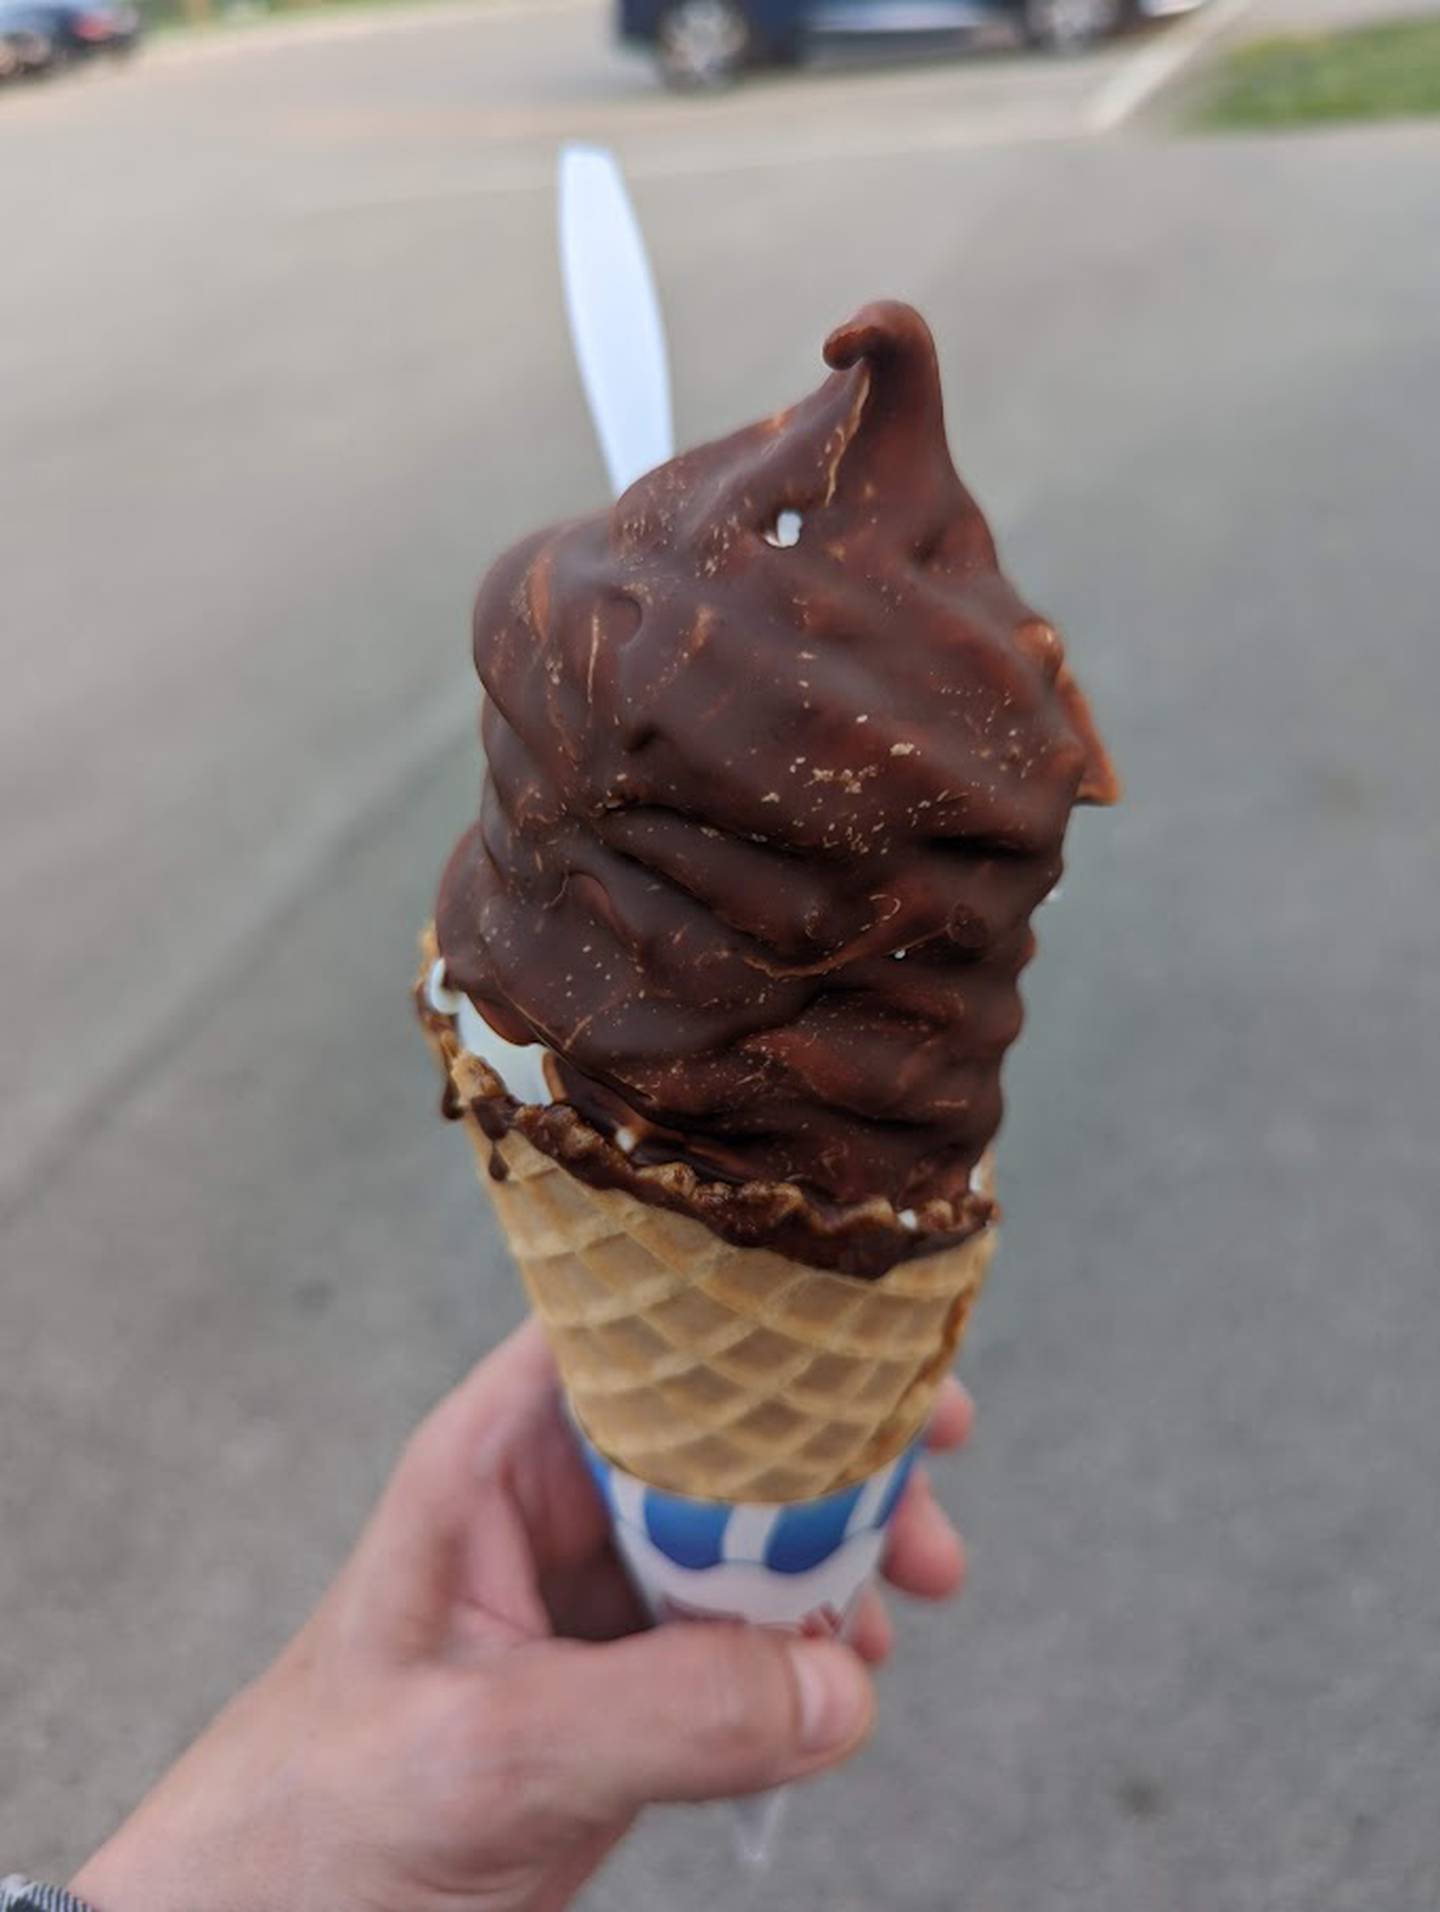 Pictured is a soft serve vanilla ice cream in a waffle cone and with a chocolate topping as served at the Minooka Creamery,